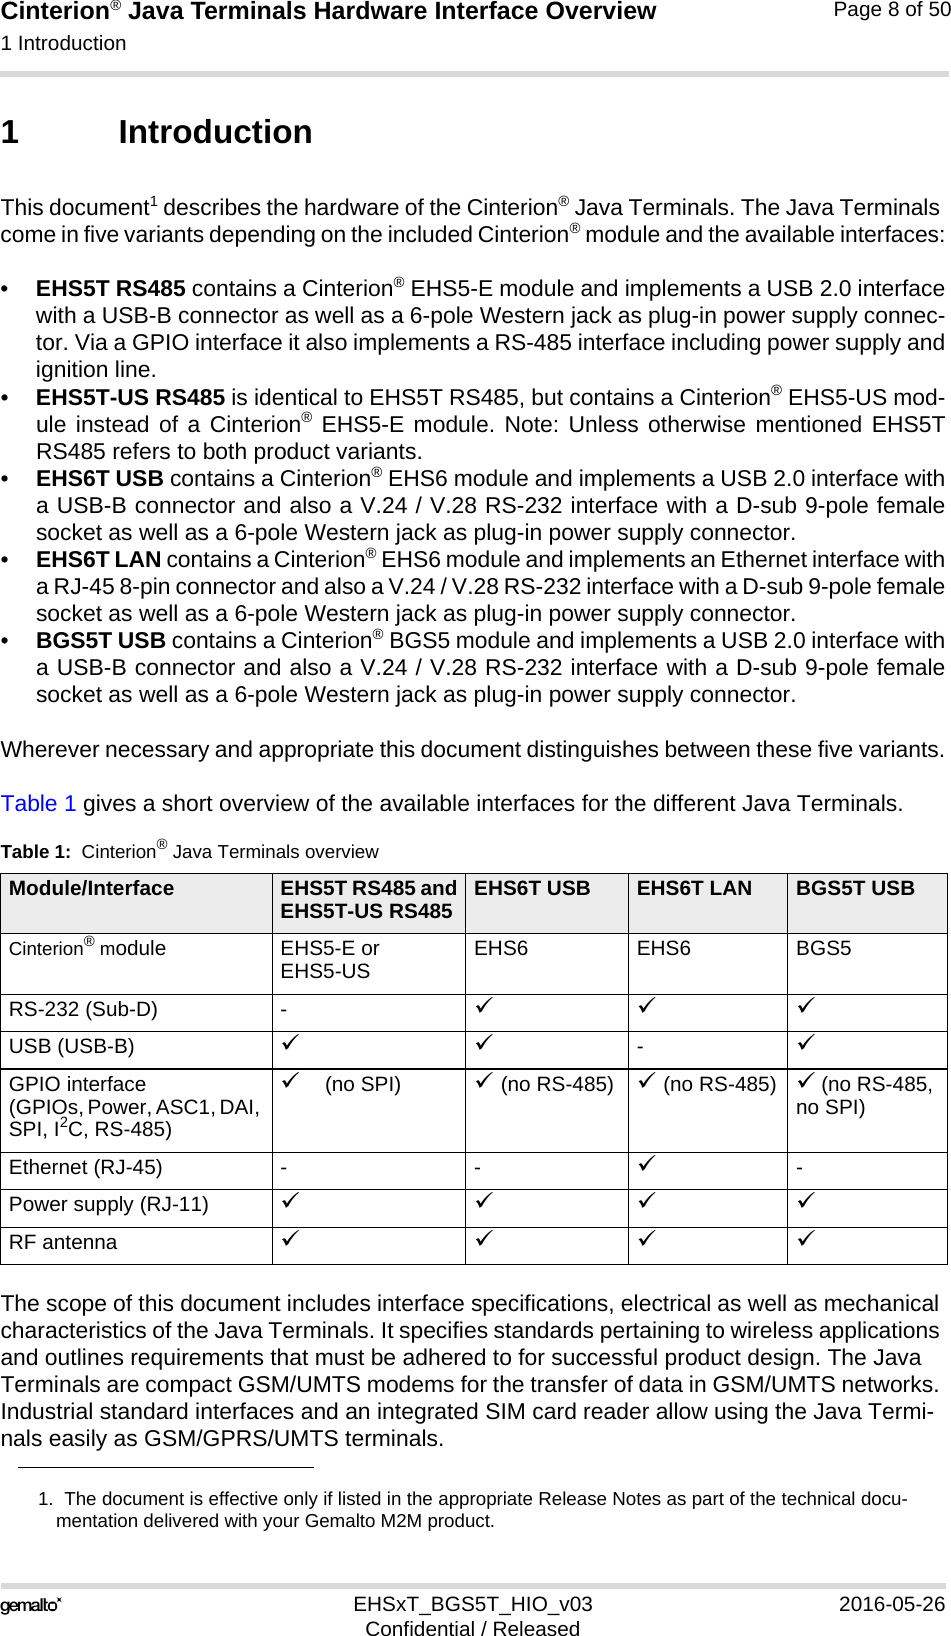 Cinterion® Java Terminals Hardware Interface Overview1 Introduction16EHSxT_BGS5T_HIO_v03 2016-05-26Confidential / ReleasedPage 8 of 501 IntroductionThis document1 describes the hardware of the Cinterion® Java Terminals. The Java Terminals come in five variants depending on the included Cinterion® module and the available interfaces:•EHS5T RS485 contains a Cinterion® EHS5-E module and implements a USB 2.0 interfacewith a USB-B connector as well as a 6-pole Western jack as plug-in power supply connec-tor. Via a GPIO interface it also implements a RS-485 interface including power supply andignition line.•EHS5T-US RS485 is identical to EHS5T RS485, but contains a Cinterion® EHS5-US mod-ule instead of a Cinterion® EHS5-E module. Note: Unless otherwise mentioned EHS5TRS485 refers to both product variants.•EHS6T USB contains a Cinterion® EHS6 module and implements a USB 2.0 interface witha USB-B connector and also a V.24 / V.28 RS-232 interface with a D-sub 9-pole femalesocket as well as a 6-pole Western jack as plug-in power supply connector.•EHS6T LAN contains a Cinterion® EHS6 module and implements an Ethernet interface witha RJ-45 8-pin connector and also a V.24 / V.28 RS-232 interface with a D-sub 9-pole femalesocket as well as a 6-pole Western jack as plug-in power supply connector.•BGS5T USB contains a Cinterion® BGS5 module and implements a USB 2.0 interface witha USB-B connector and also a V.24 / V.28 RS-232 interface with a D-sub 9-pole femalesocket as well as a 6-pole Western jack as plug-in power supply connector. Wherever necessary and appropriate this document distinguishes between these five variants.Table 1 gives a short overview of the available interfaces for the different Java Terminals.The scope of this document includes interface specifications, electrical as well as mechanical characteristics of the Java Terminals. It specifies standards pertaining to wireless applications and outlines requirements that must be adhered to for successful product design. The Java Terminals are compact GSM/UMTS modems for the transfer of data in GSM/UMTS networks. Industrial standard interfaces and an integrated SIM card reader allow using the Java Termi-nals easily as GSM/GPRS/UMTS terminals. 1.  The document is effective only if listed in the appropriate Release Notes as part of the technical docu-mentation delivered with your Gemalto M2M product.Table 1:  Cinterion® Java Terminals overviewModule/Interface EHS5T RS485 andEHS5T-US RS485 EHS6T USB EHS6T LAN BGS5T USBCinterion® module EHS5-E or EHS5-US EHS6 EHS6 BGS5RS-232 (Sub-D) - USB (USB-B) -GPIO interface(GPIOs, Power, ASC1, DAI, SPI, I2C, RS-485)(no SPI)  (no RS-485)  (no RS-485)  (no RS-485, no SPI)Ethernet (RJ-45) - - -Power supply (RJ-11) RF antenna 